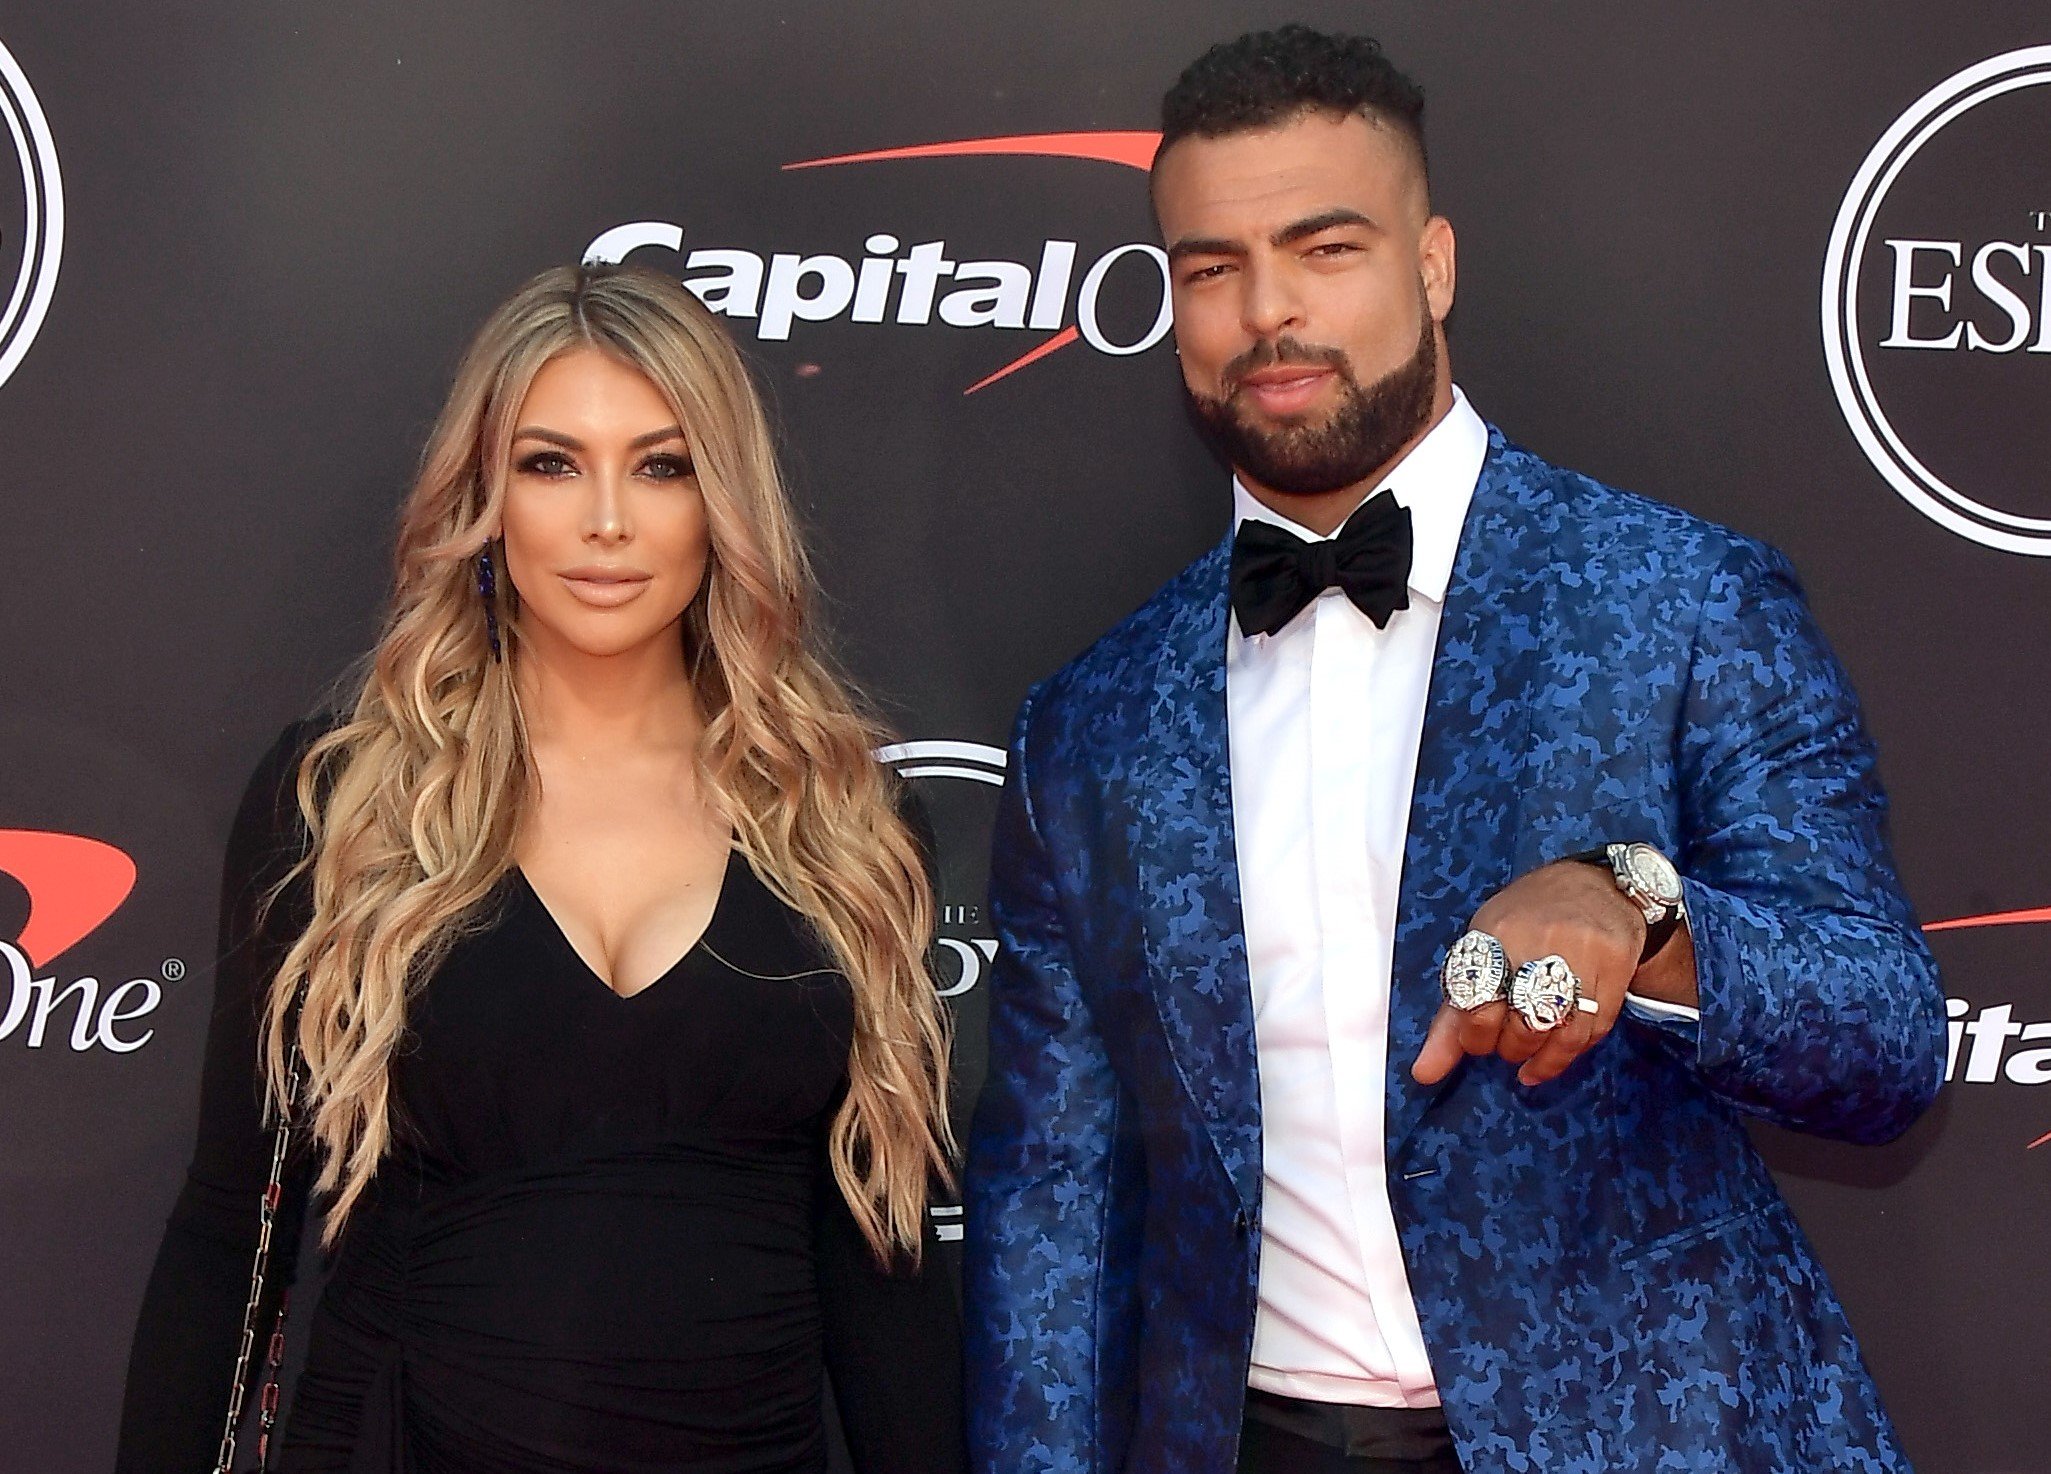  Marissa Powell and Kyle Van Noy at the 2019 ESPYs in Los Angeles, California. | Source: Getty Images